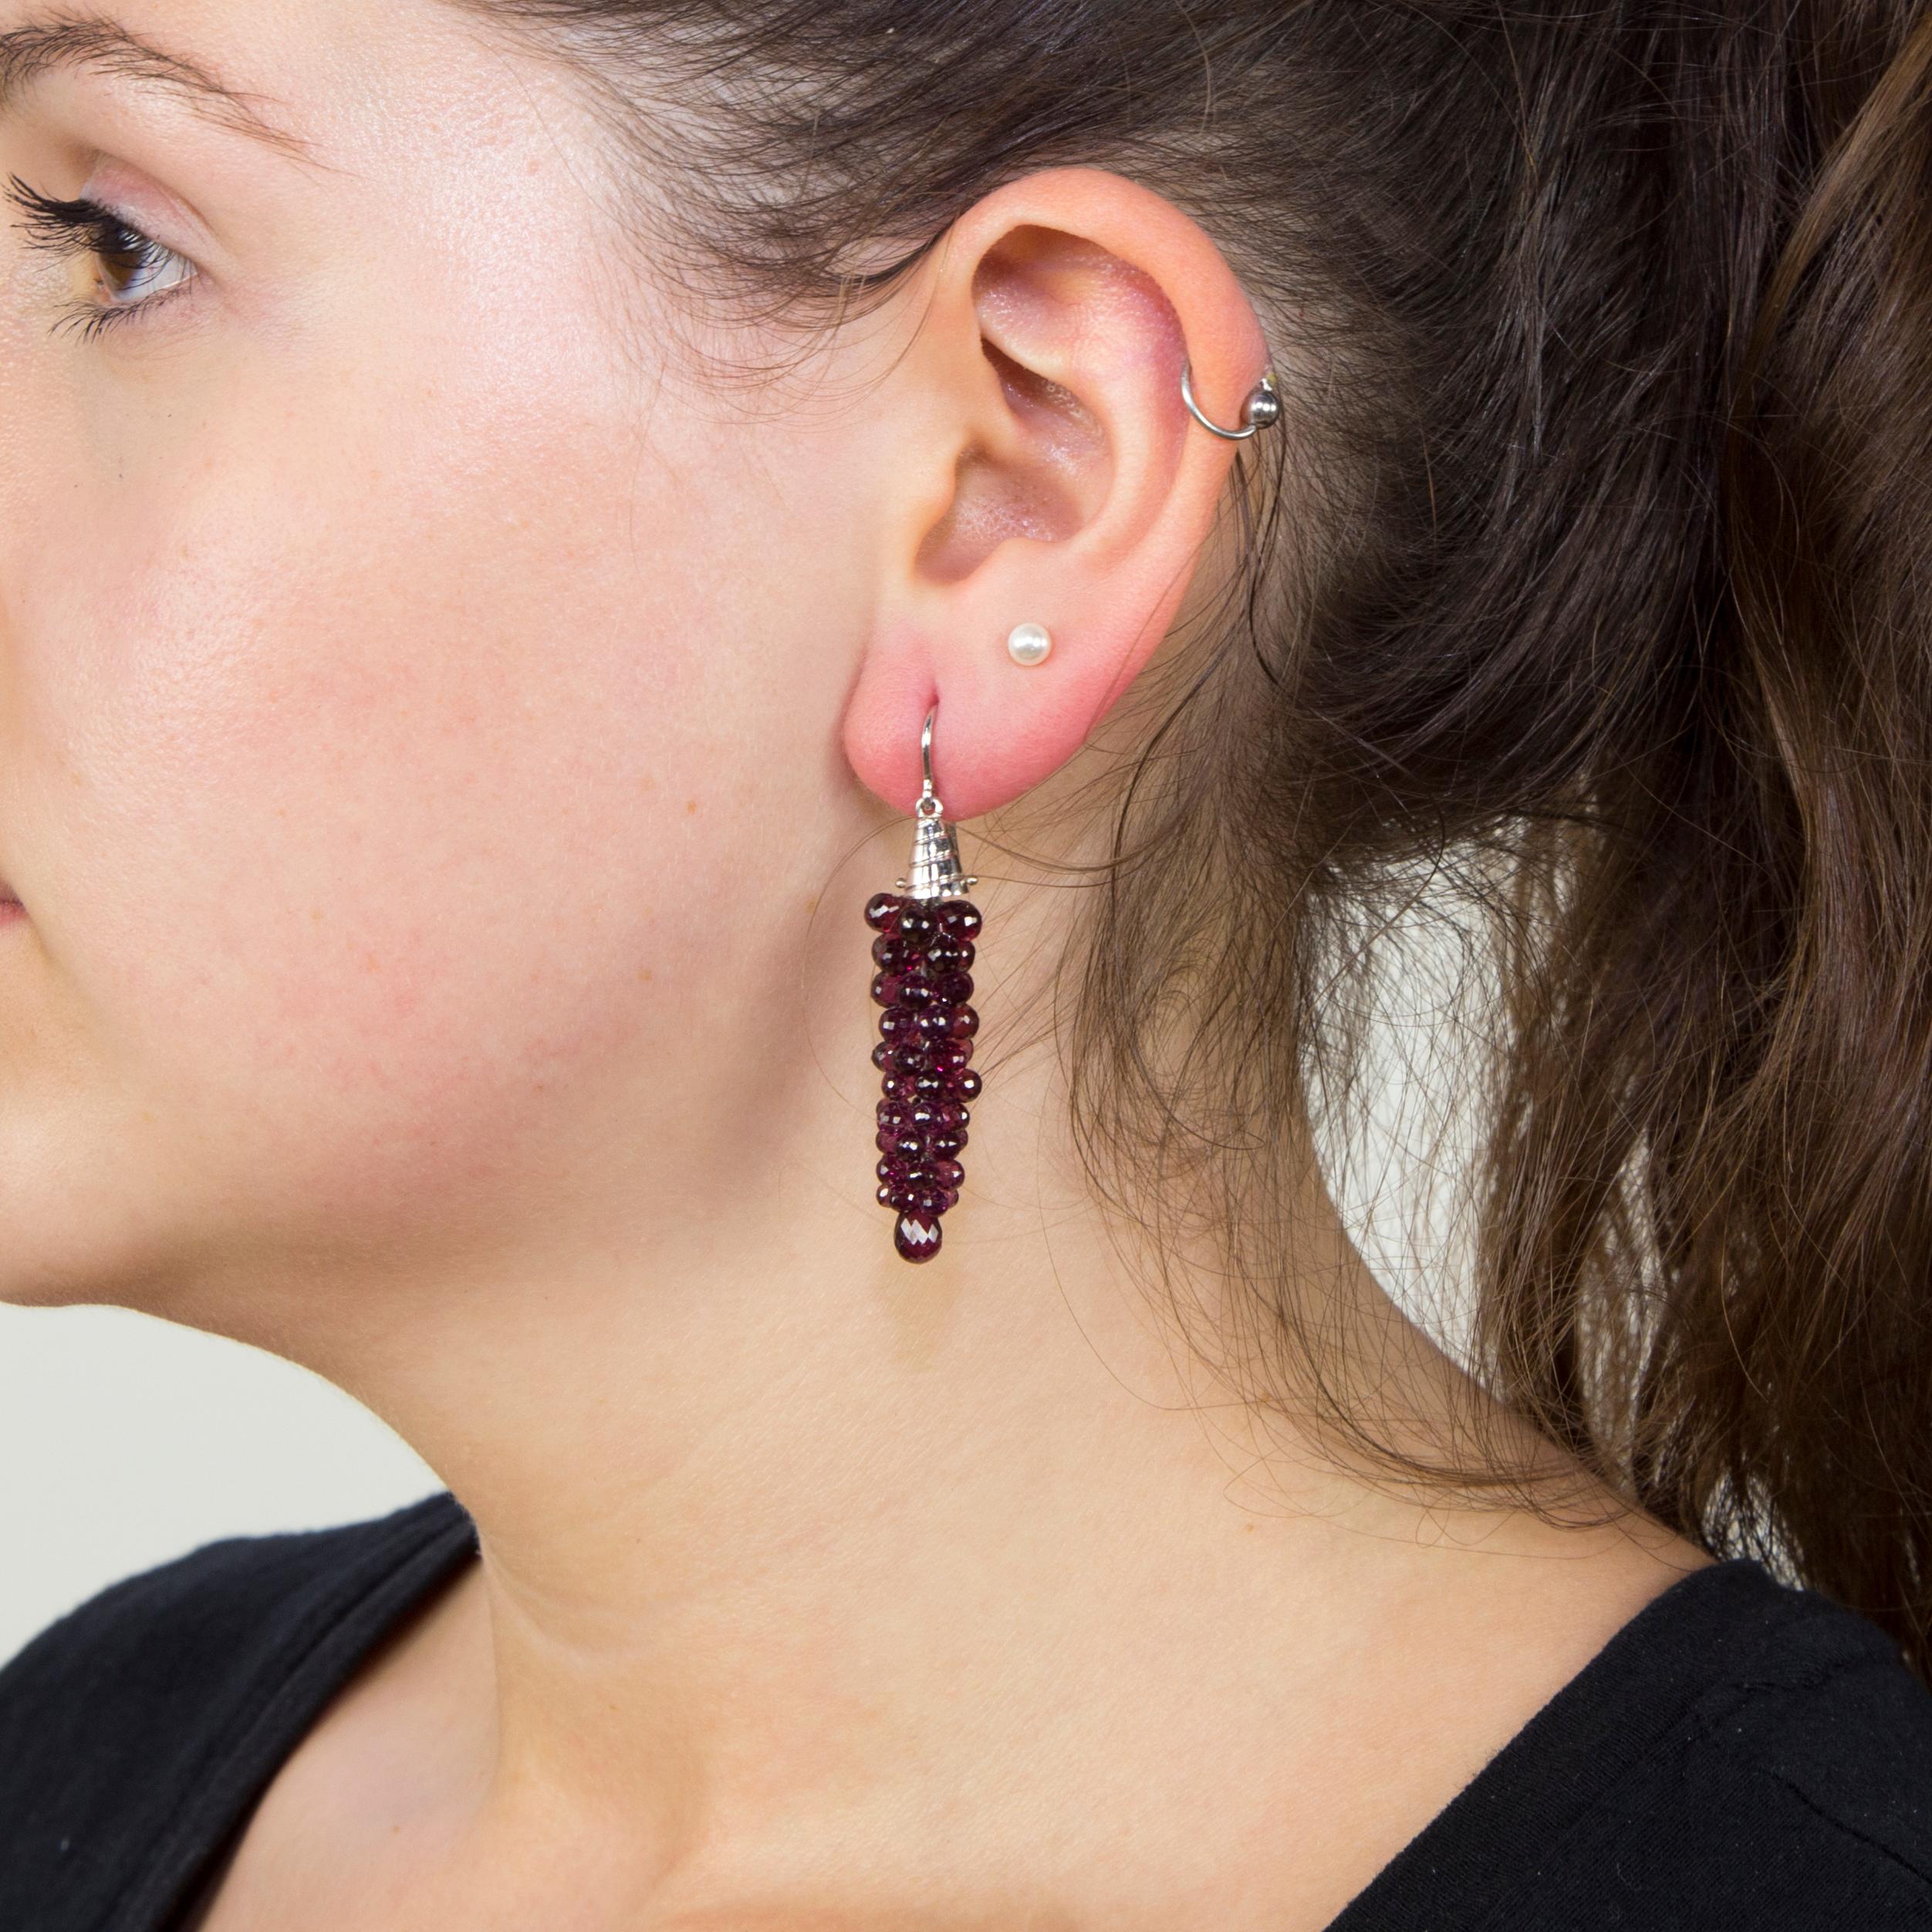 Stunning Gemstone Amethyst Dangle Earrings in Grape Cluster design, held by 18k white gold caps; Beautifully hand crafted; Shepard hook system; Outstanding in every way...A must have you’ll enjoy for many years to come! 
